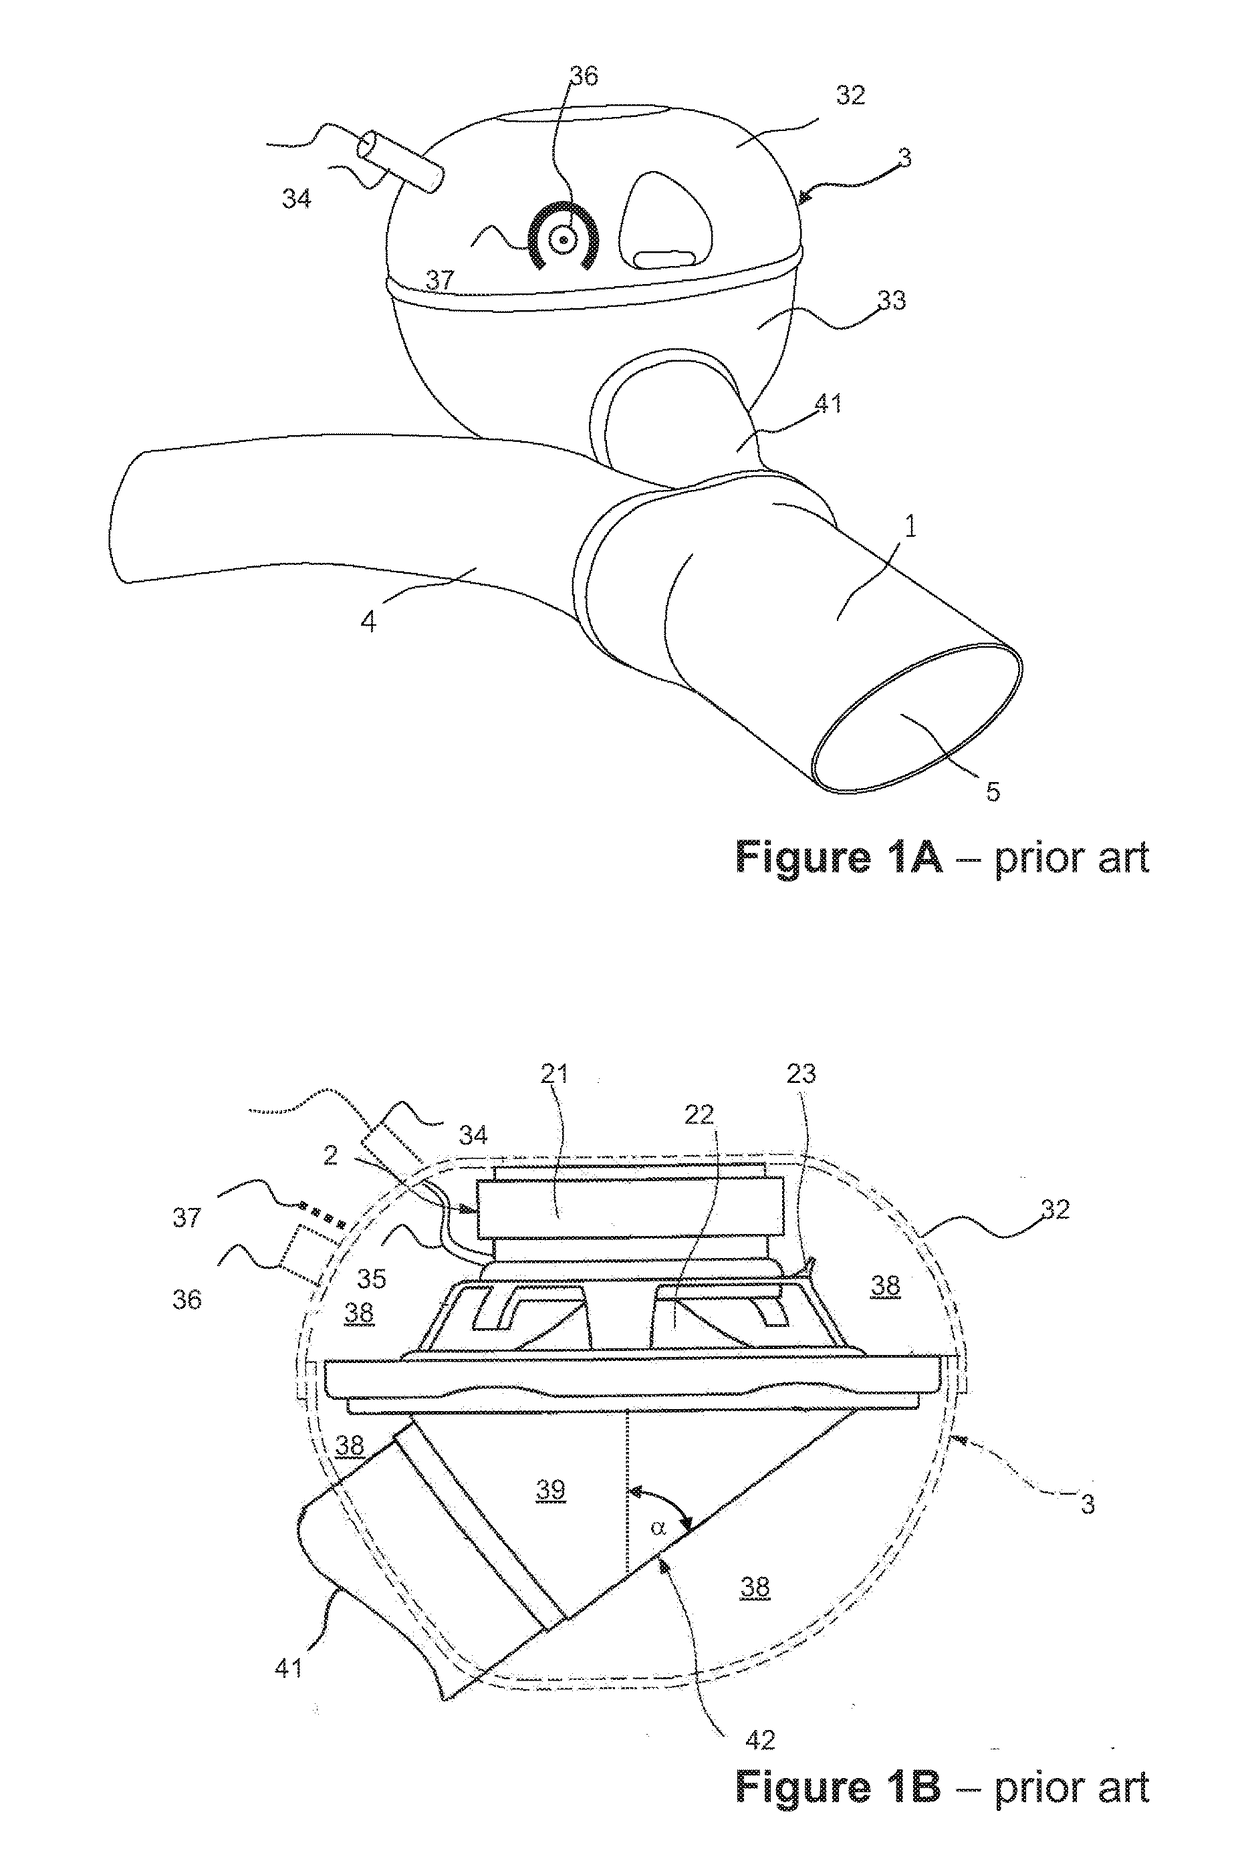 Sound generator for mounting on a vehicle to manipulate vehicle noise